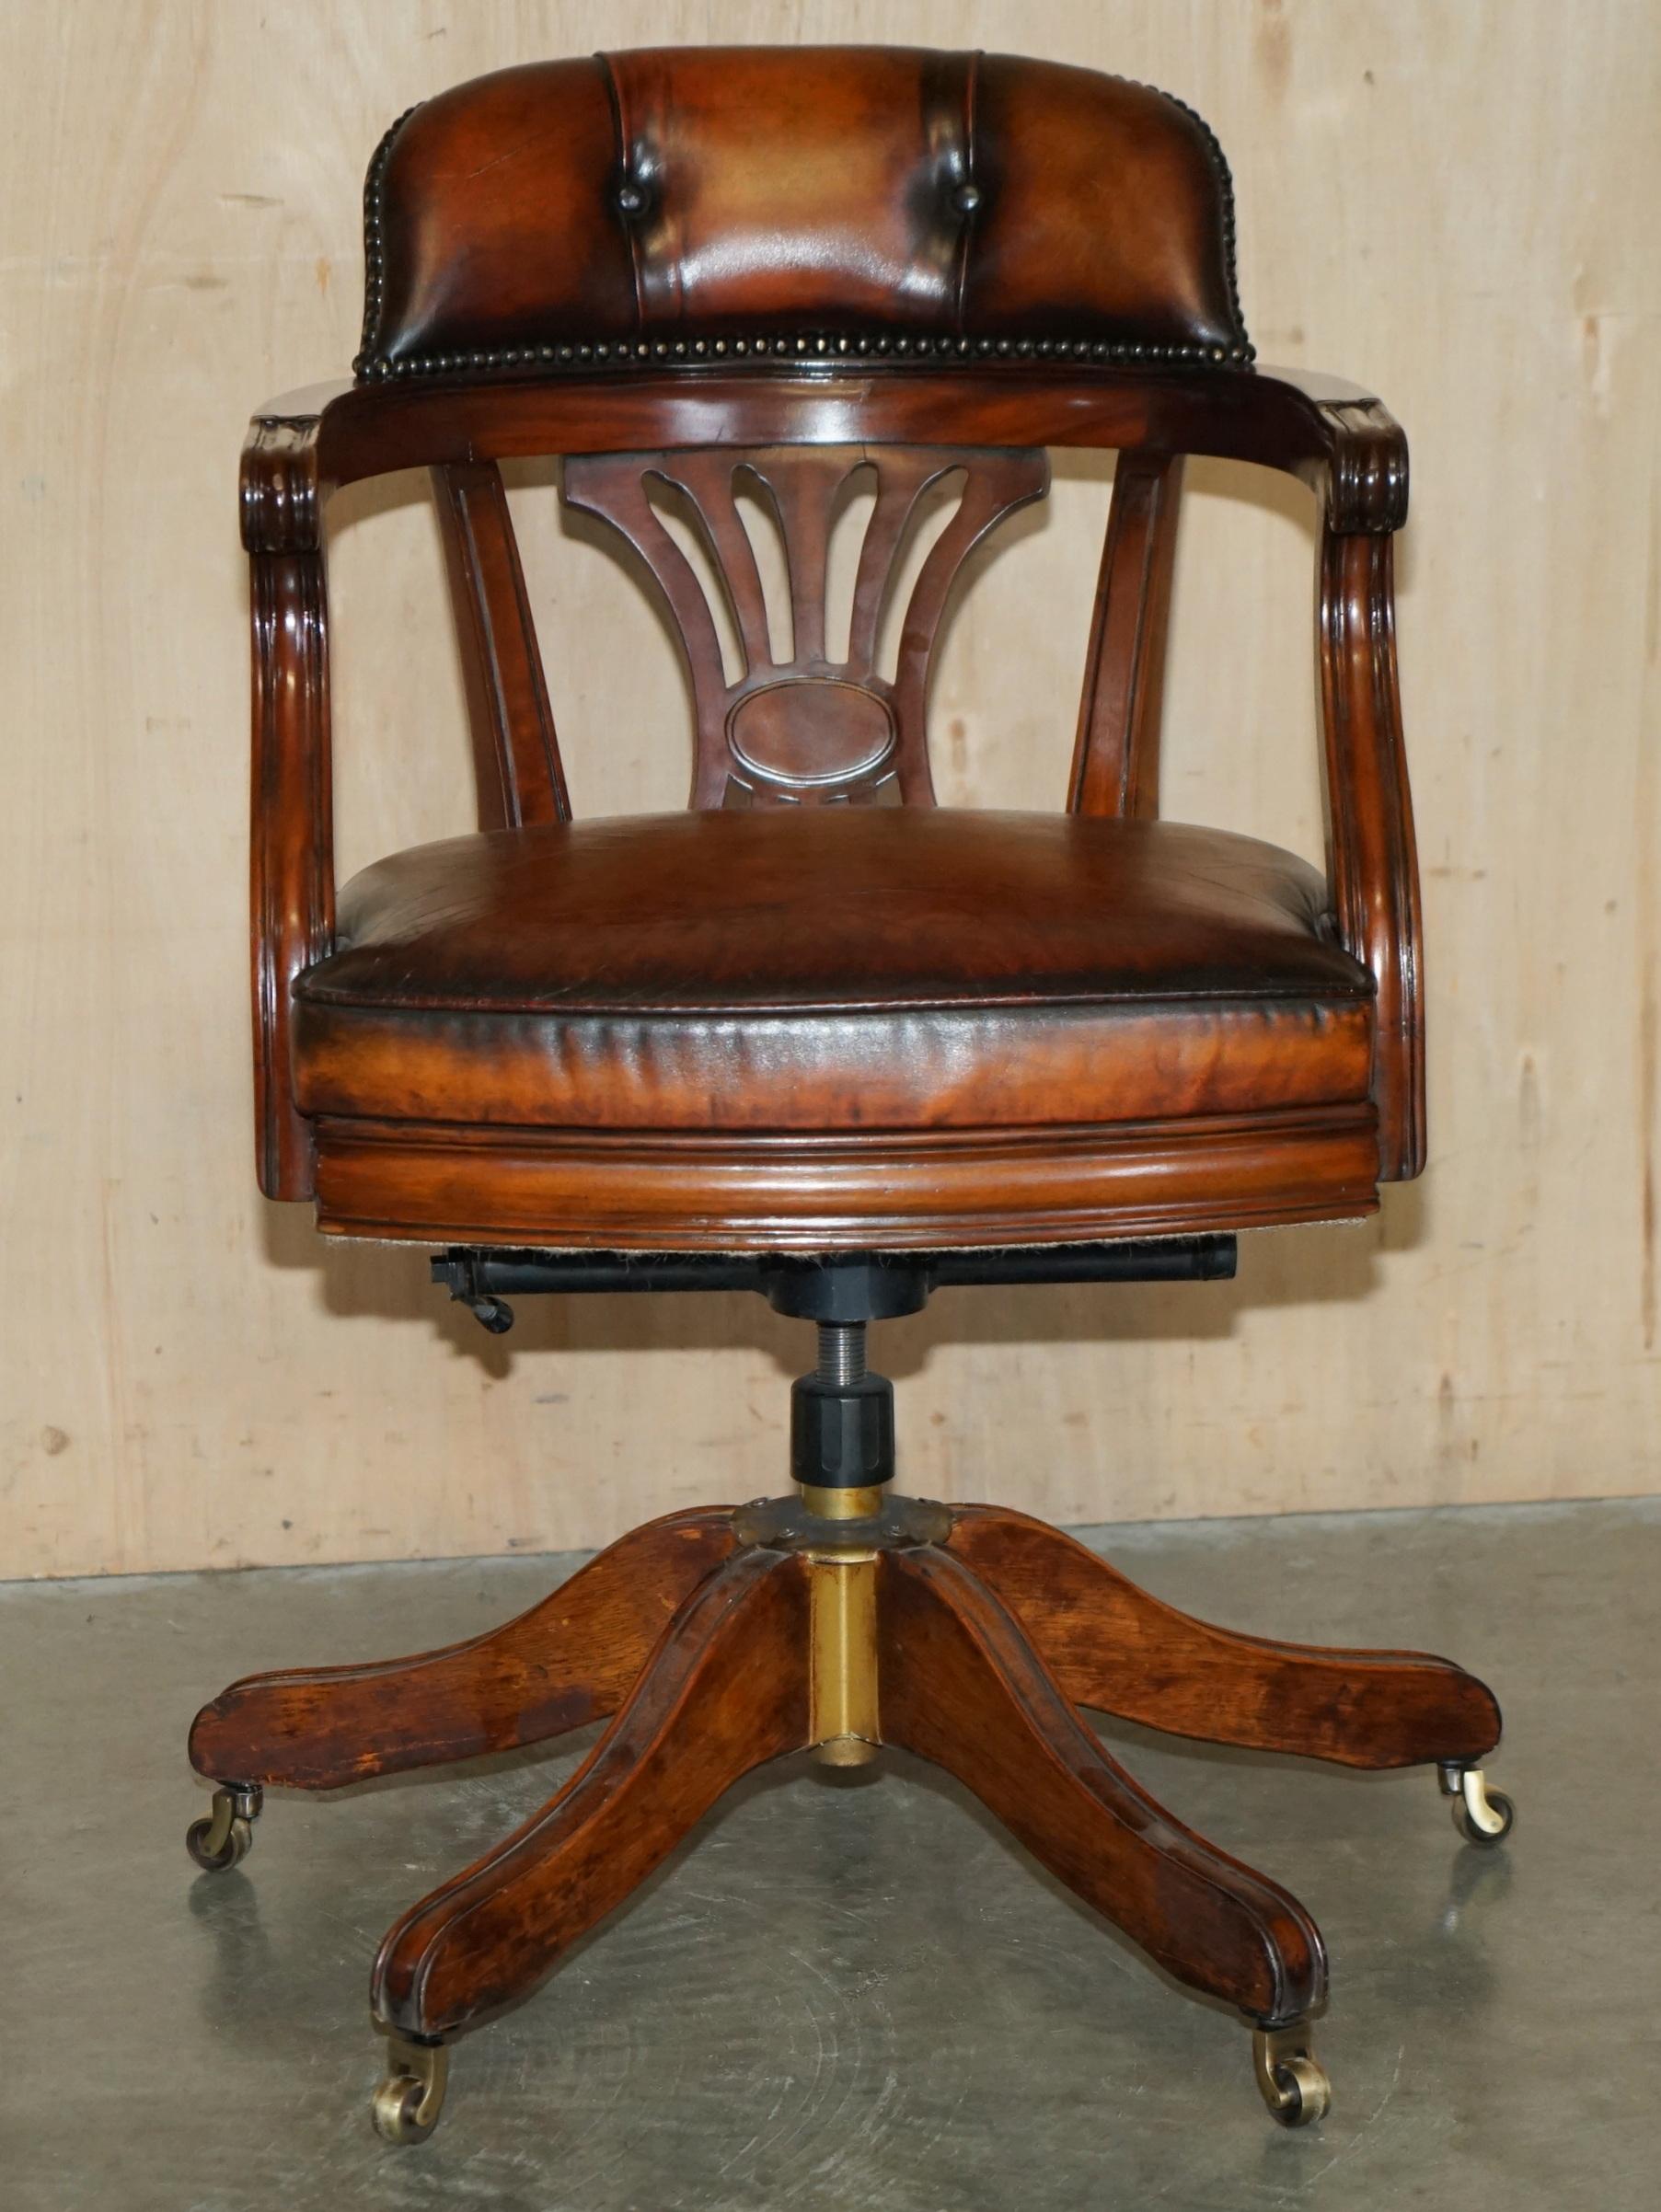 
Royal House Antiques

Royal House Antiques is delighted to offer for sale this stunning fully restored vintage William IV style Chesterfield hand dyed brown leather office chair.

Please note the delivery fee listed is just a guide, it covers